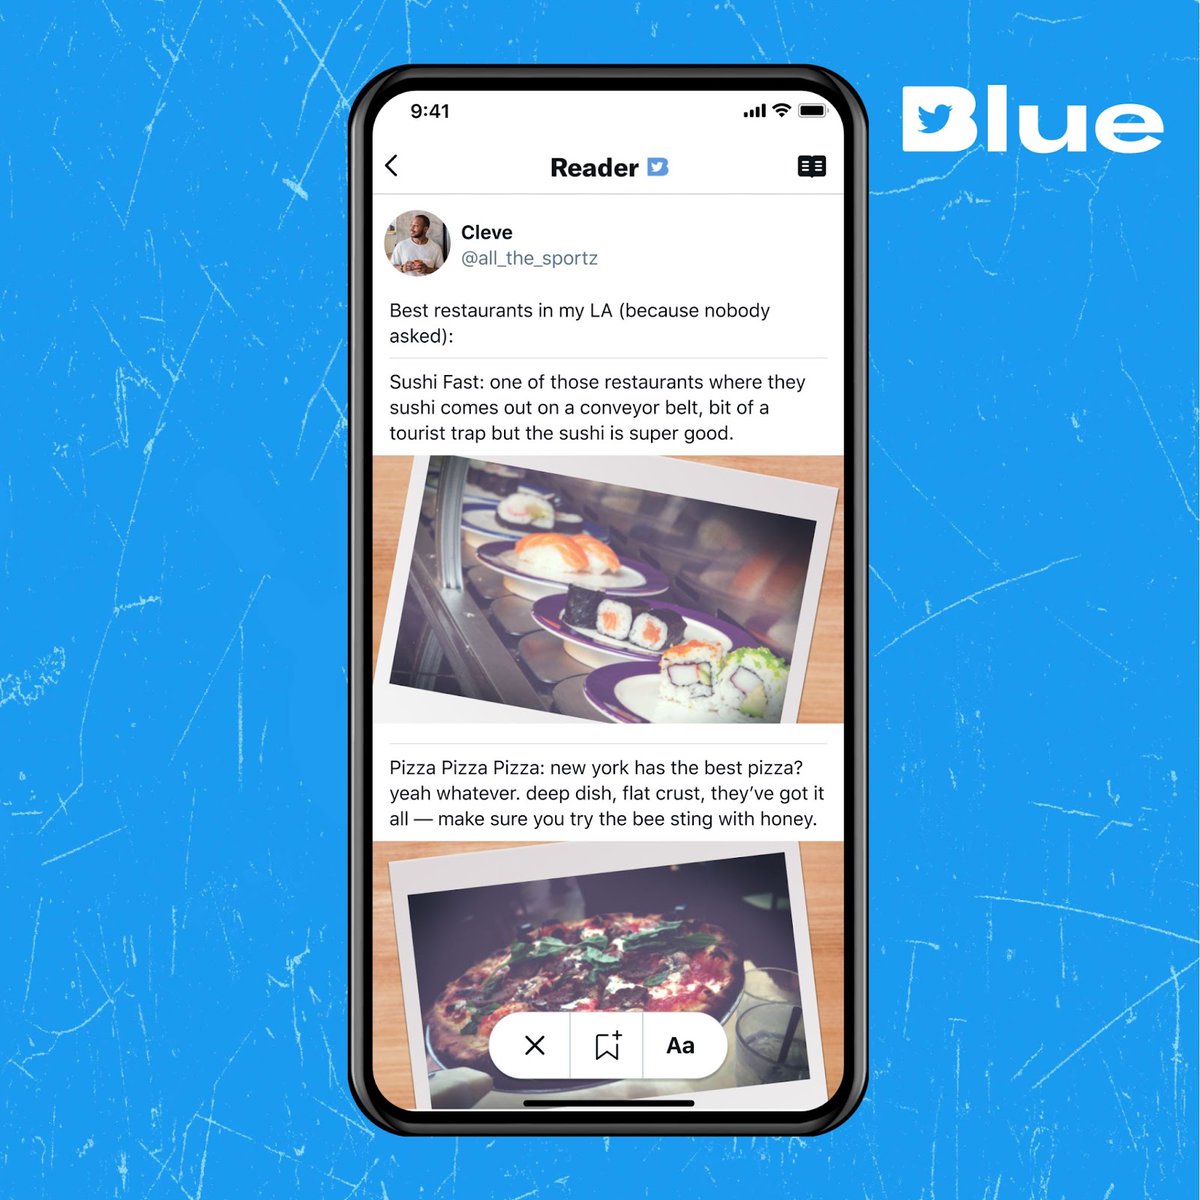 Twitter Blue Twitter Tweet: That little icon at the top? It means you’re using a Twitter Blue feature, such as Top Articles or Reader! https://t.co/vrjdO8ao11